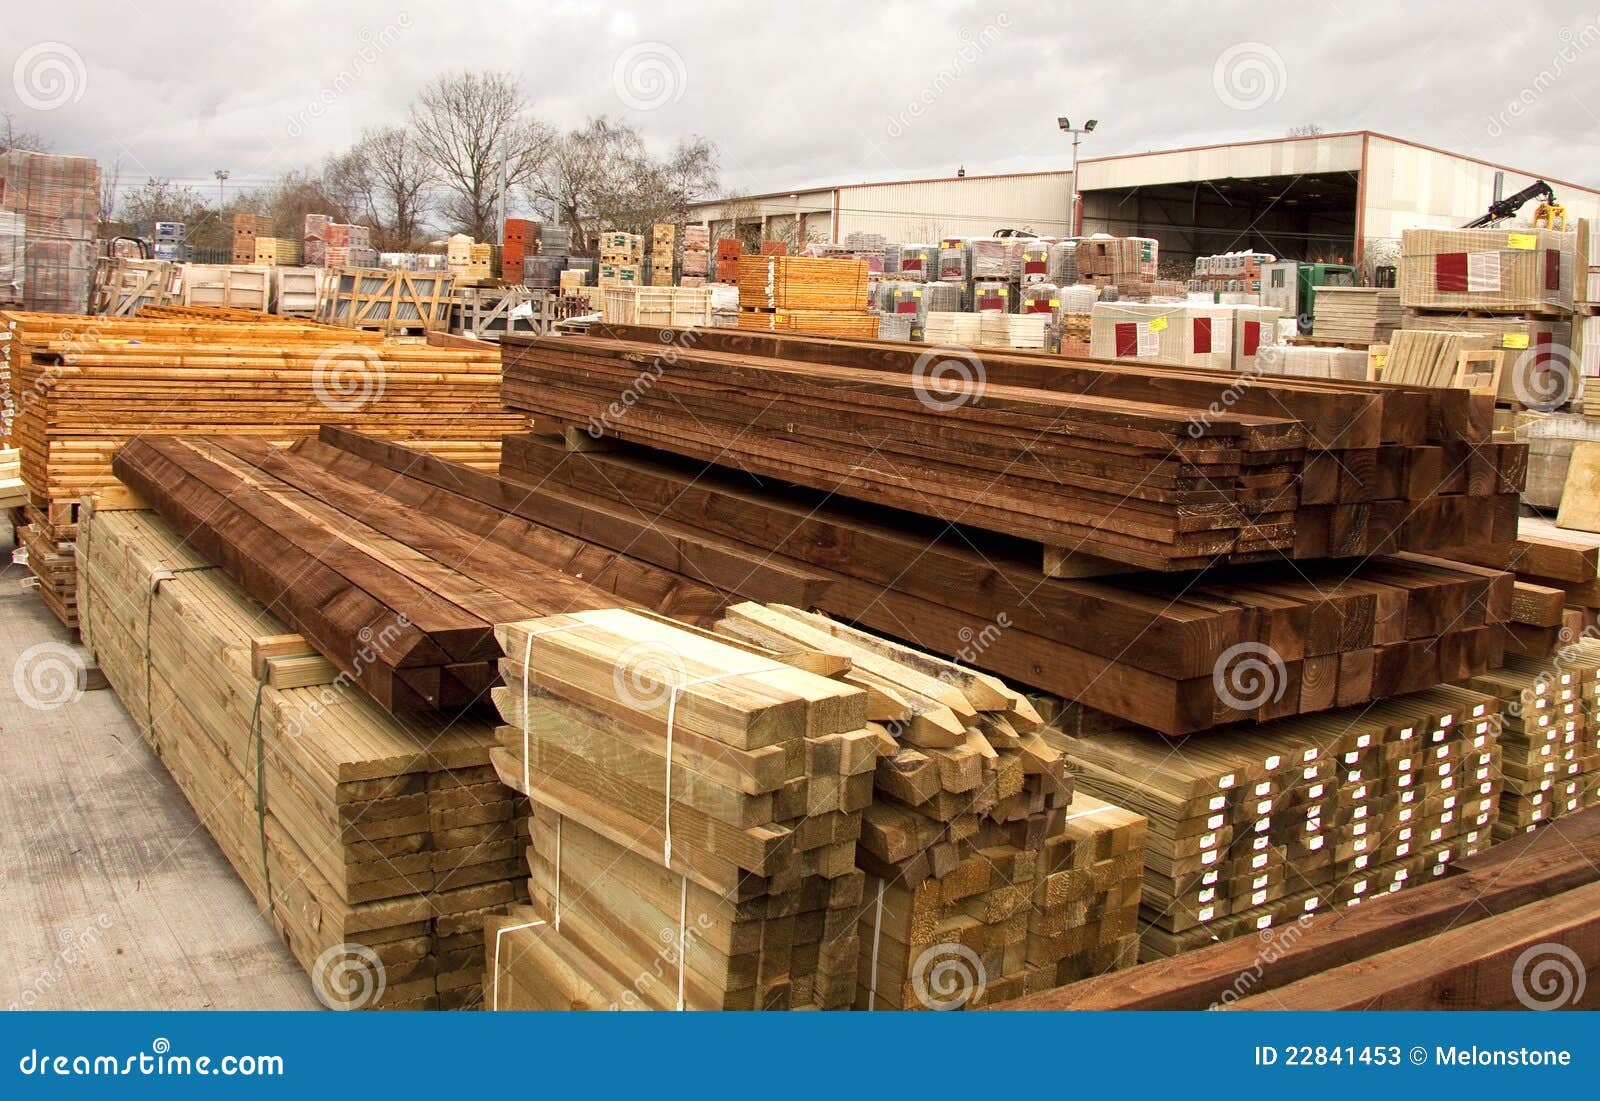 timber and building supplies